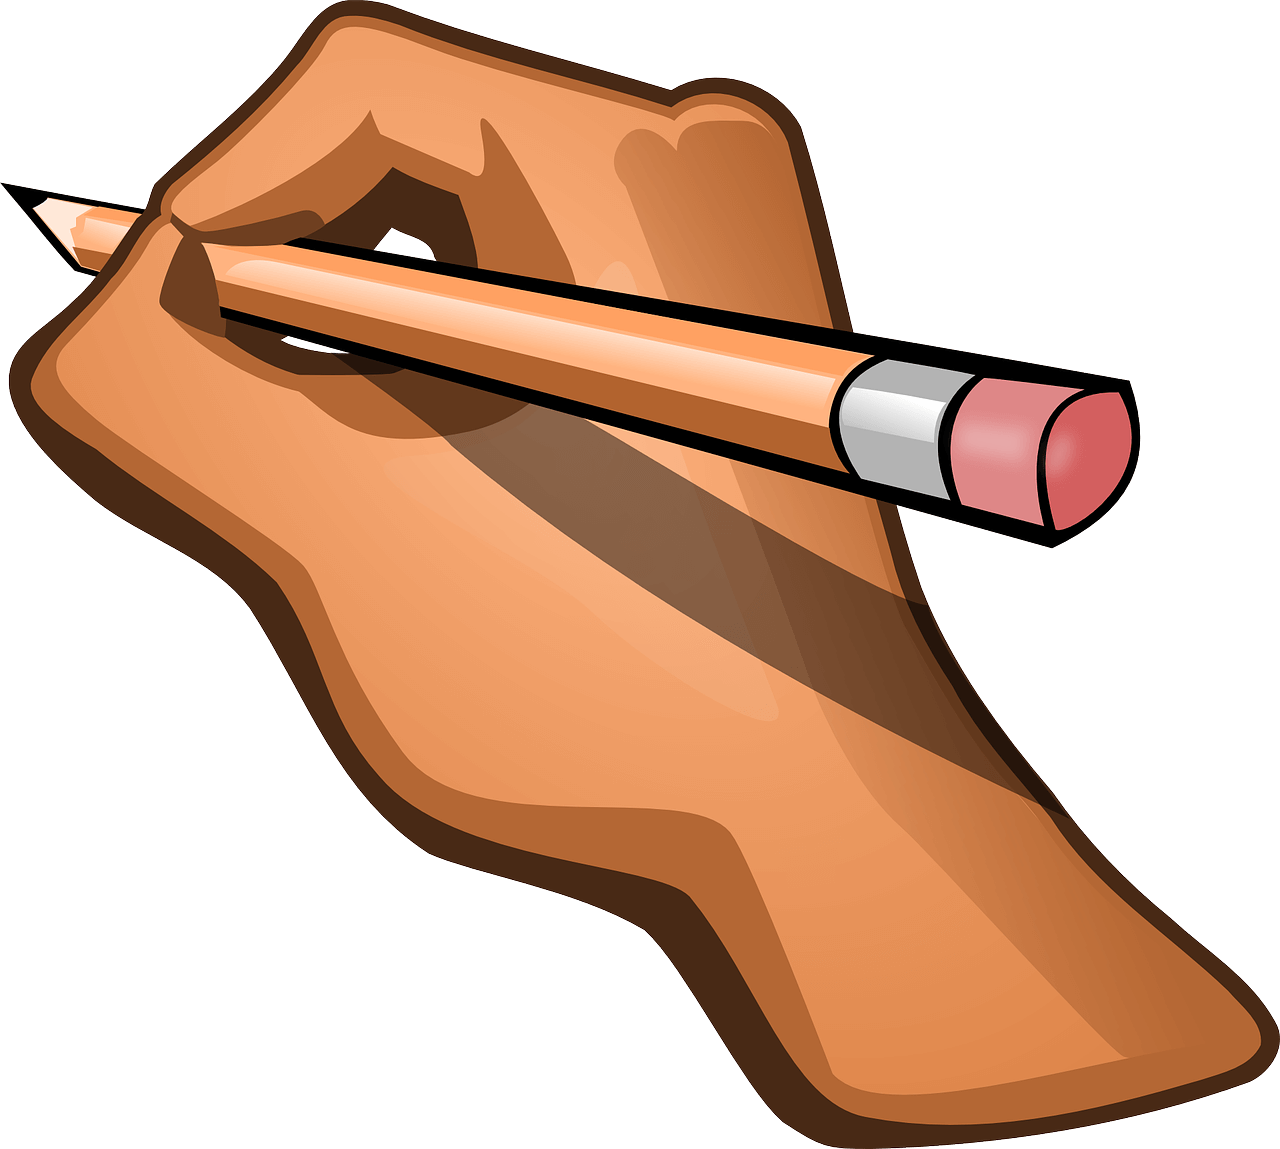 A stylized image of a hand holding a pencil